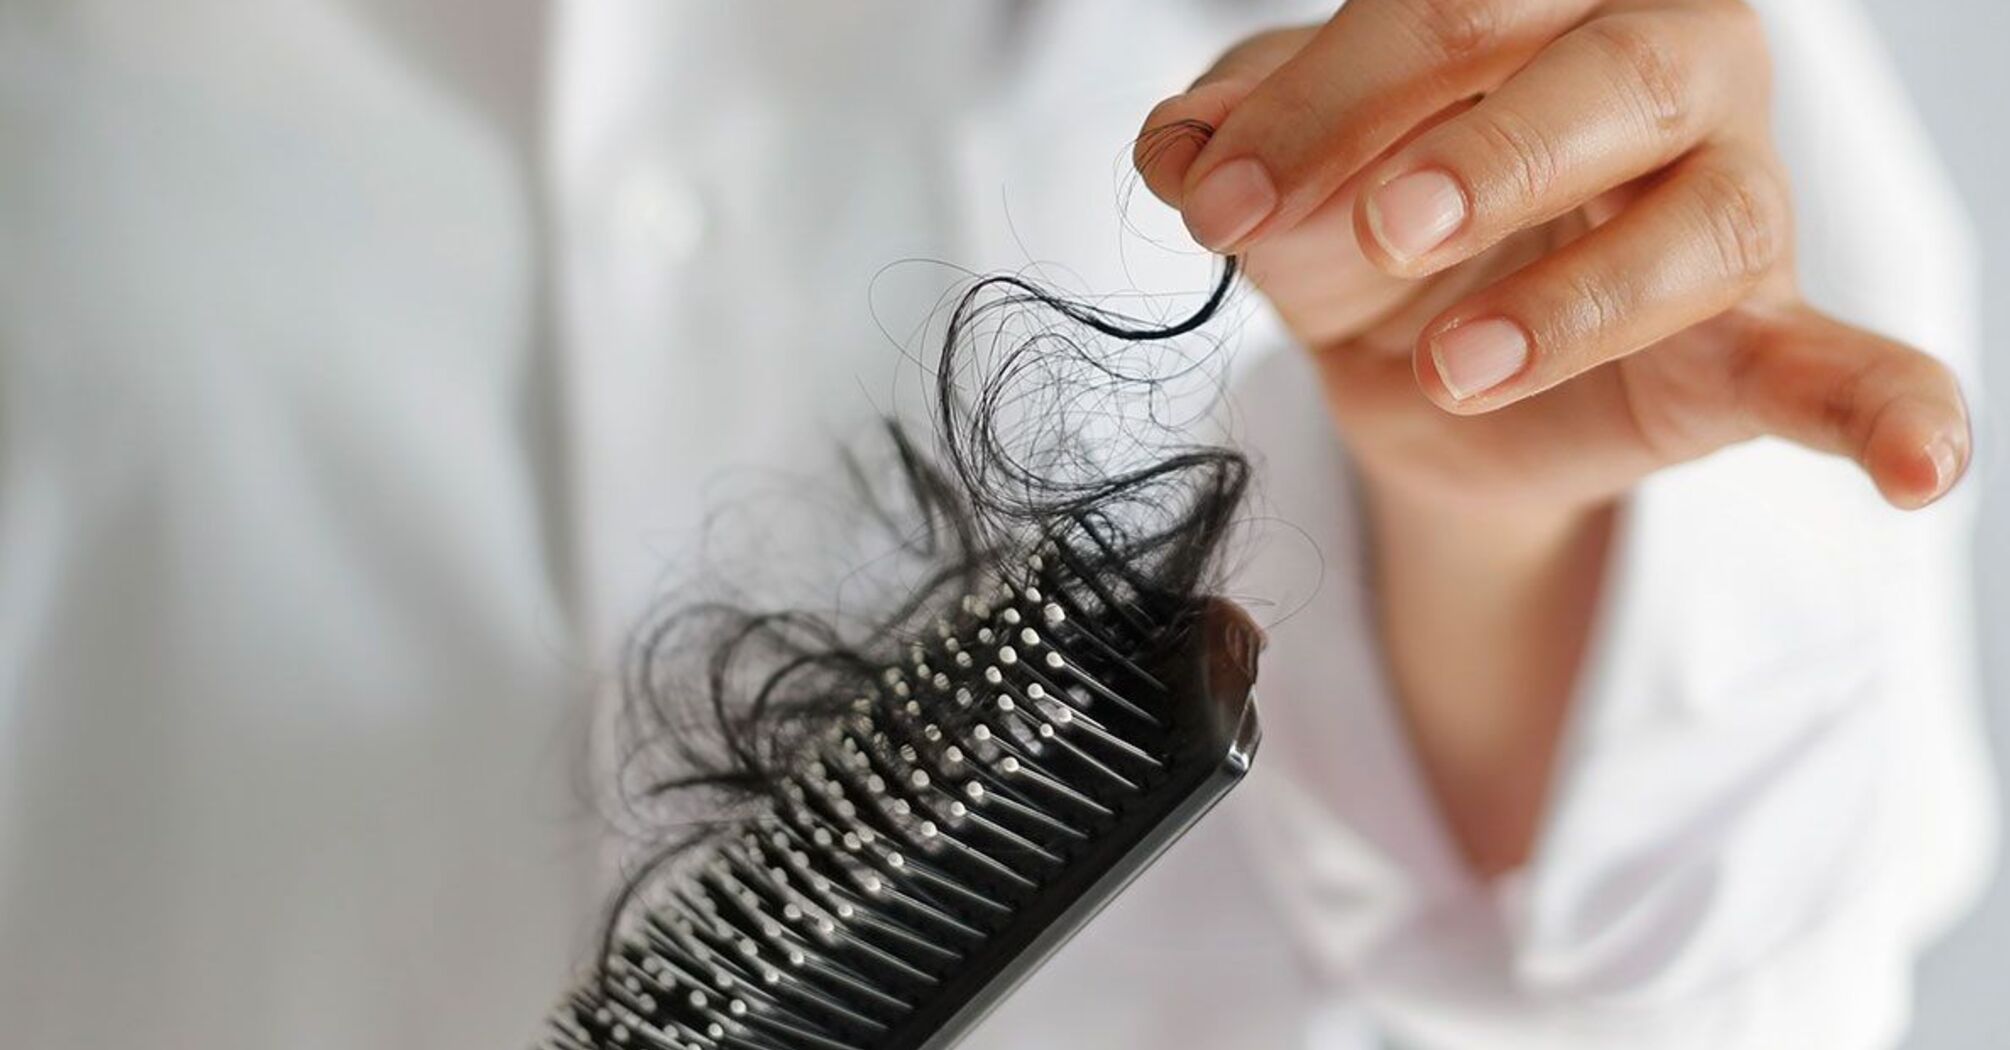 Doctors have named foods to avoid if you suffer from hair loss